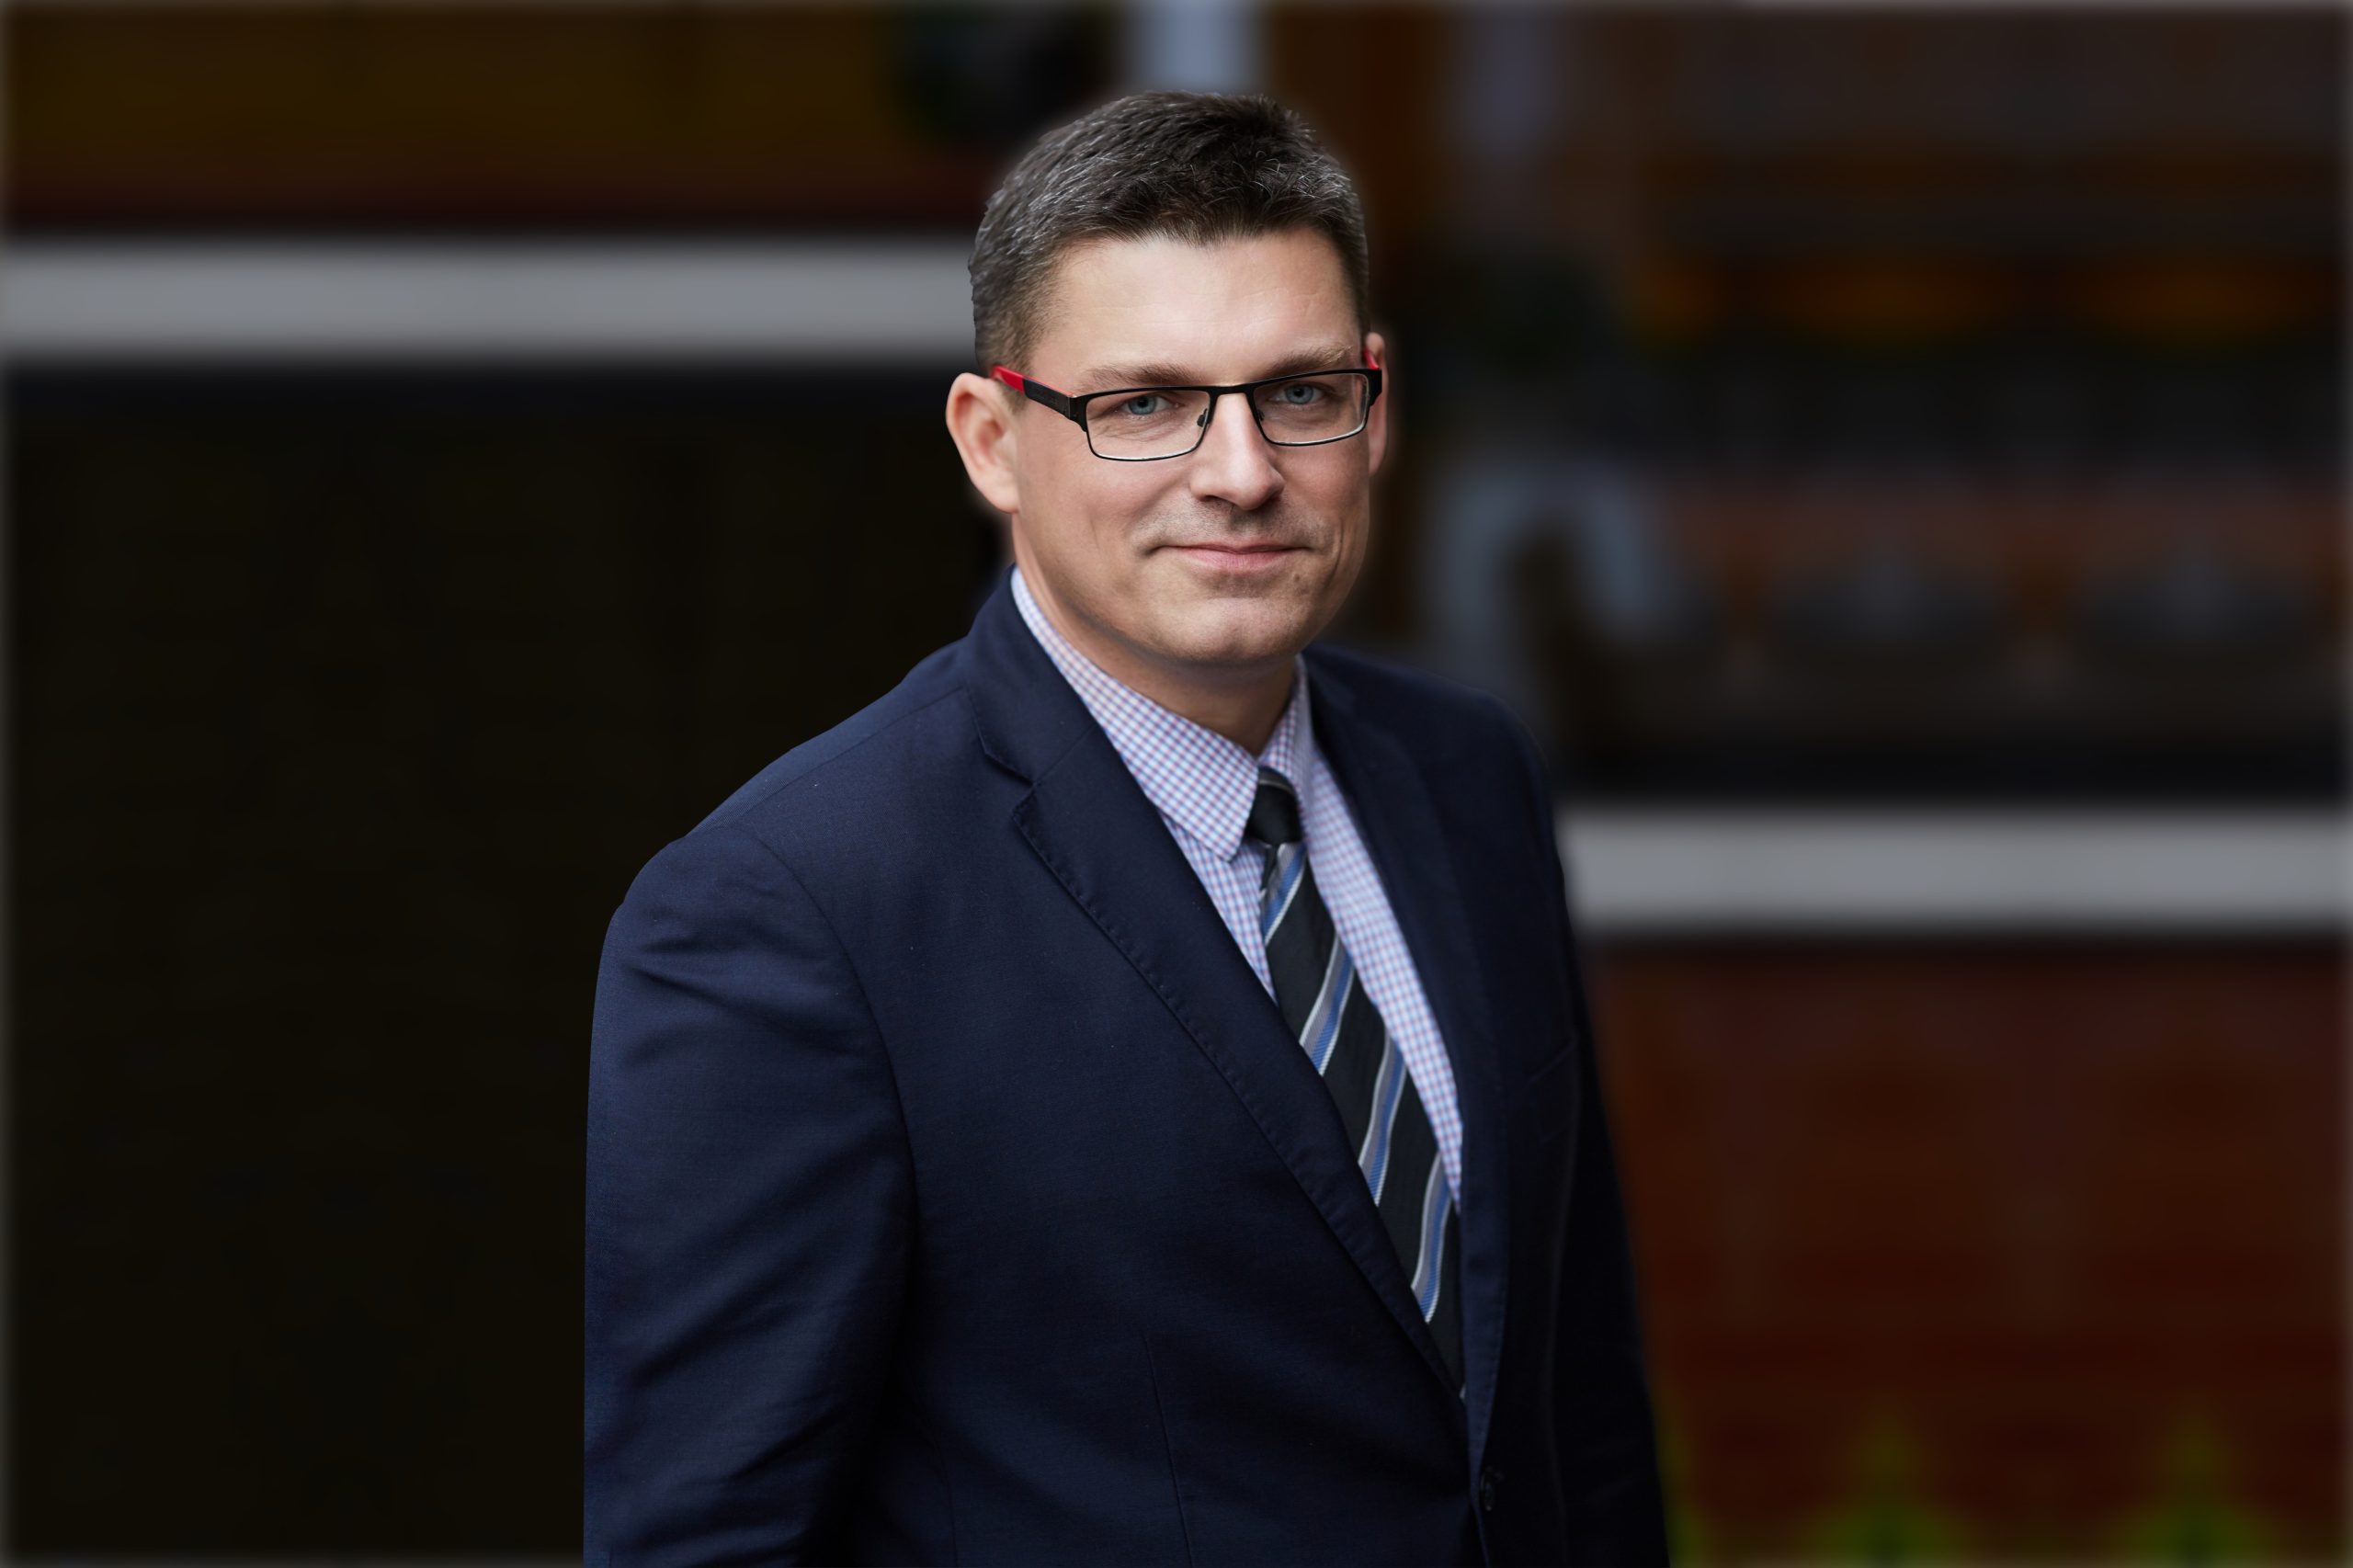 Intersafe a Lyreco companyis strengthening its presence in Poland inthe personal protective equipment sector. Ryszard Szefler, Safety Business Line Director at INTERSAFE a Lyreco company